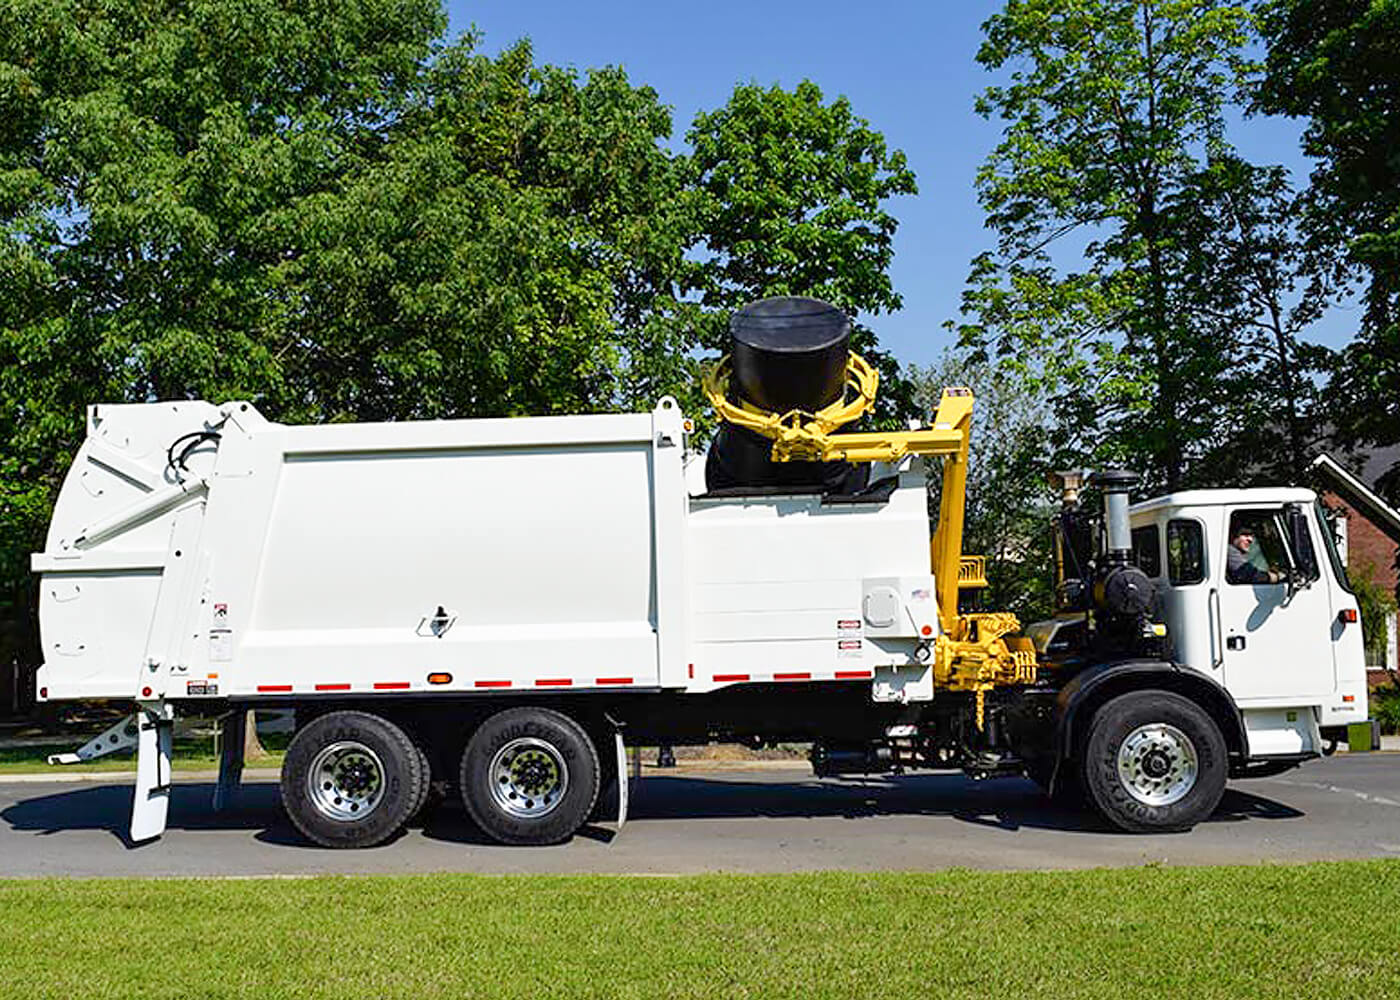 DuraPack Rapid Rail side load garbage truck for commercial trash collection